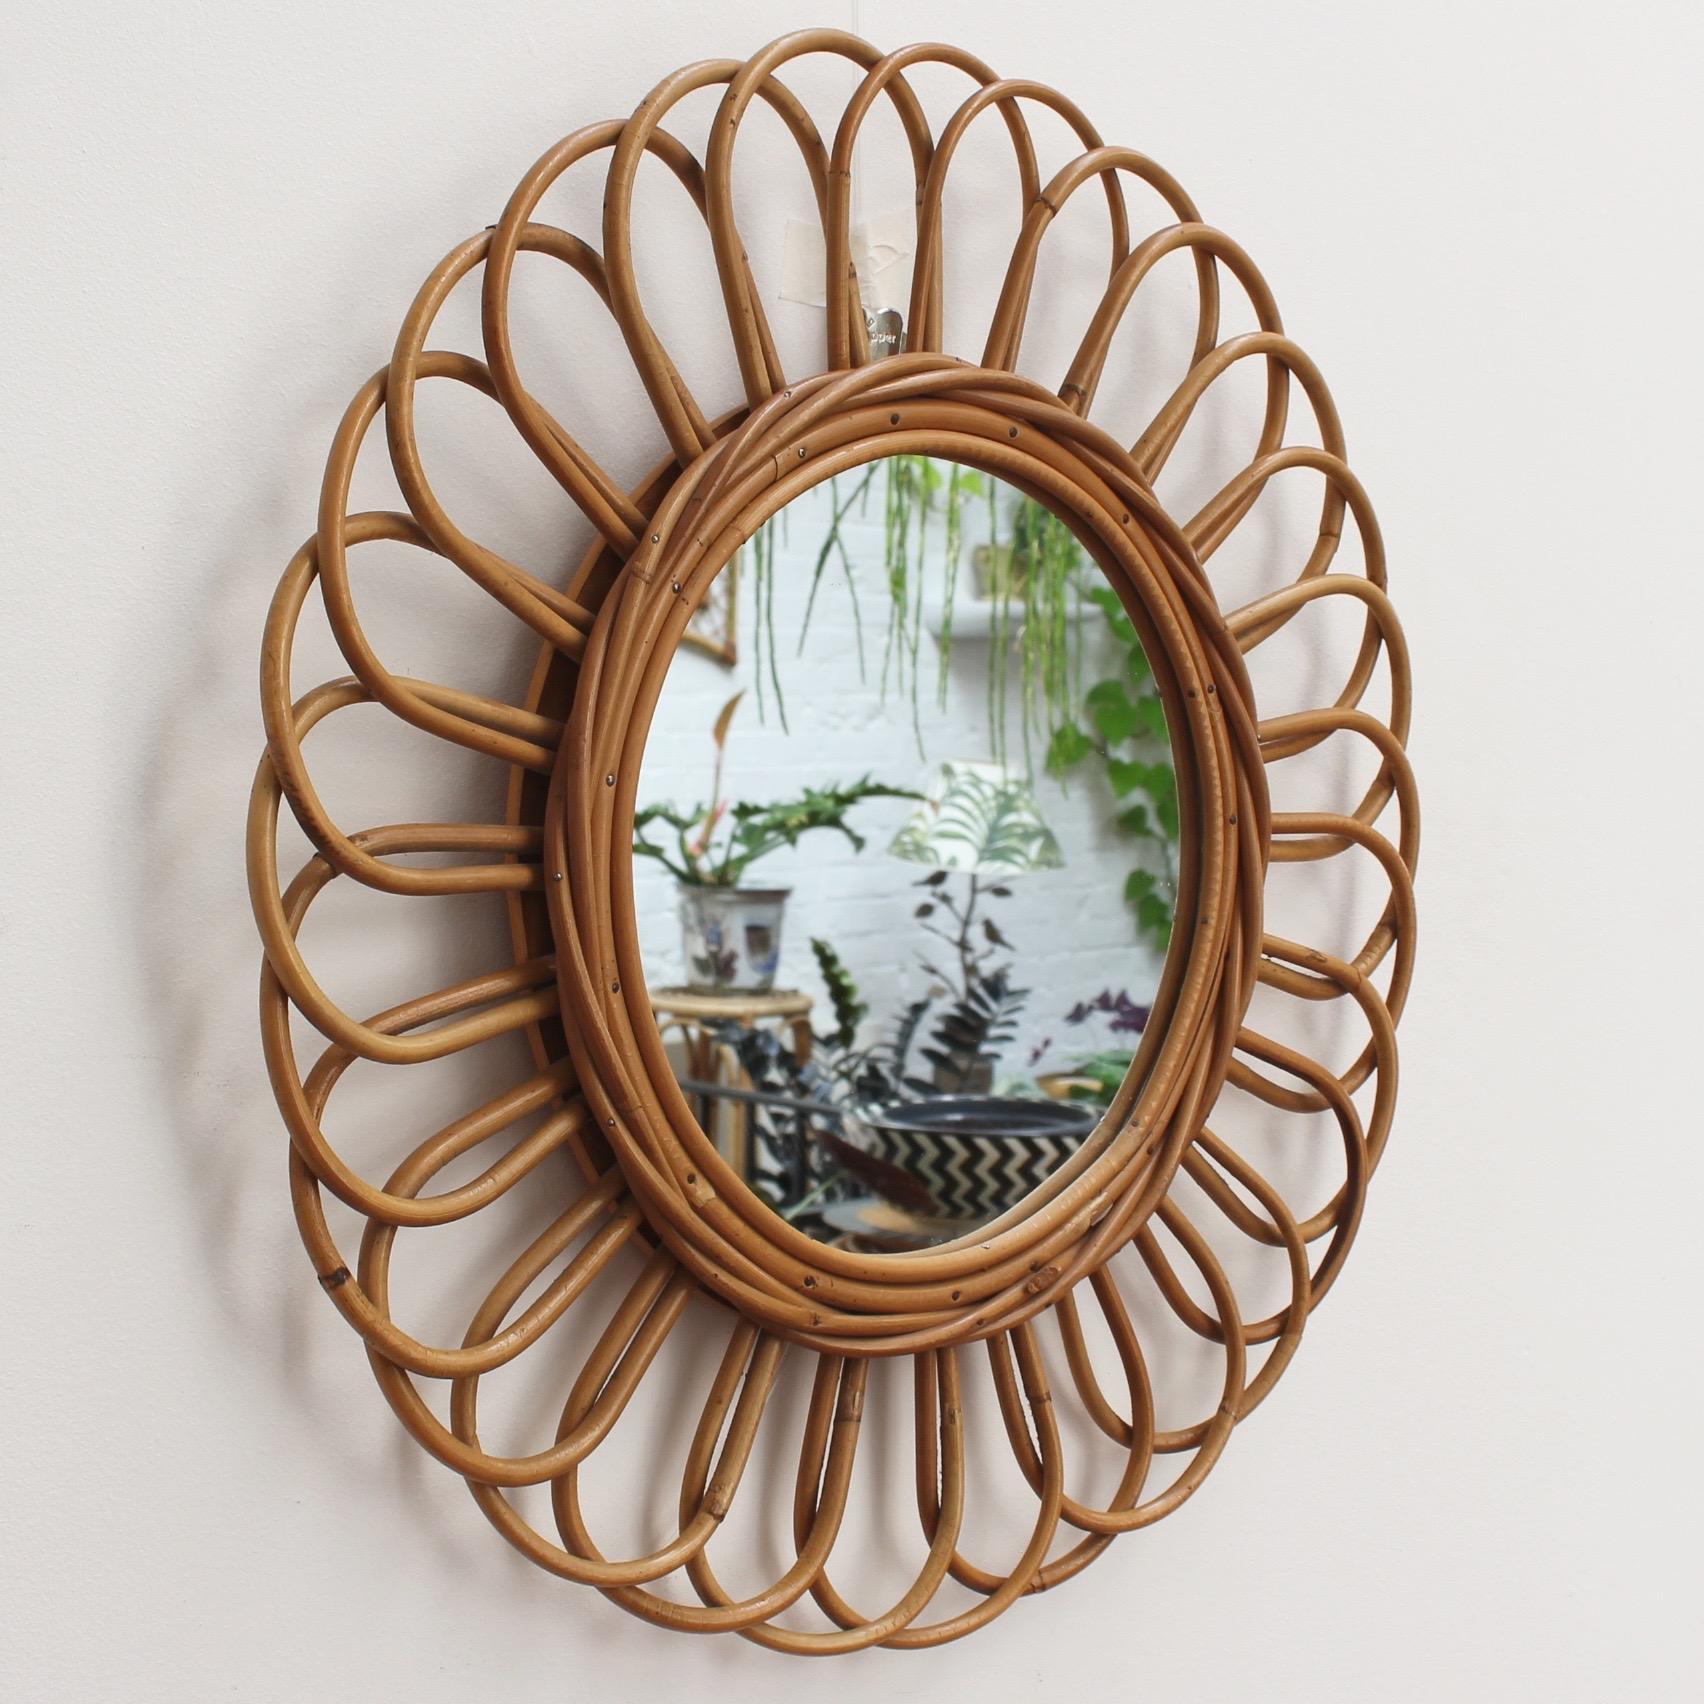 Vintage French sunflower-shaped rattan wall mirror (circa 1960s). Cheerful, stylish and very collectible, the mirror will transport you to another era on the French Riviera. It has loads of character and charm and is in good vintage condition